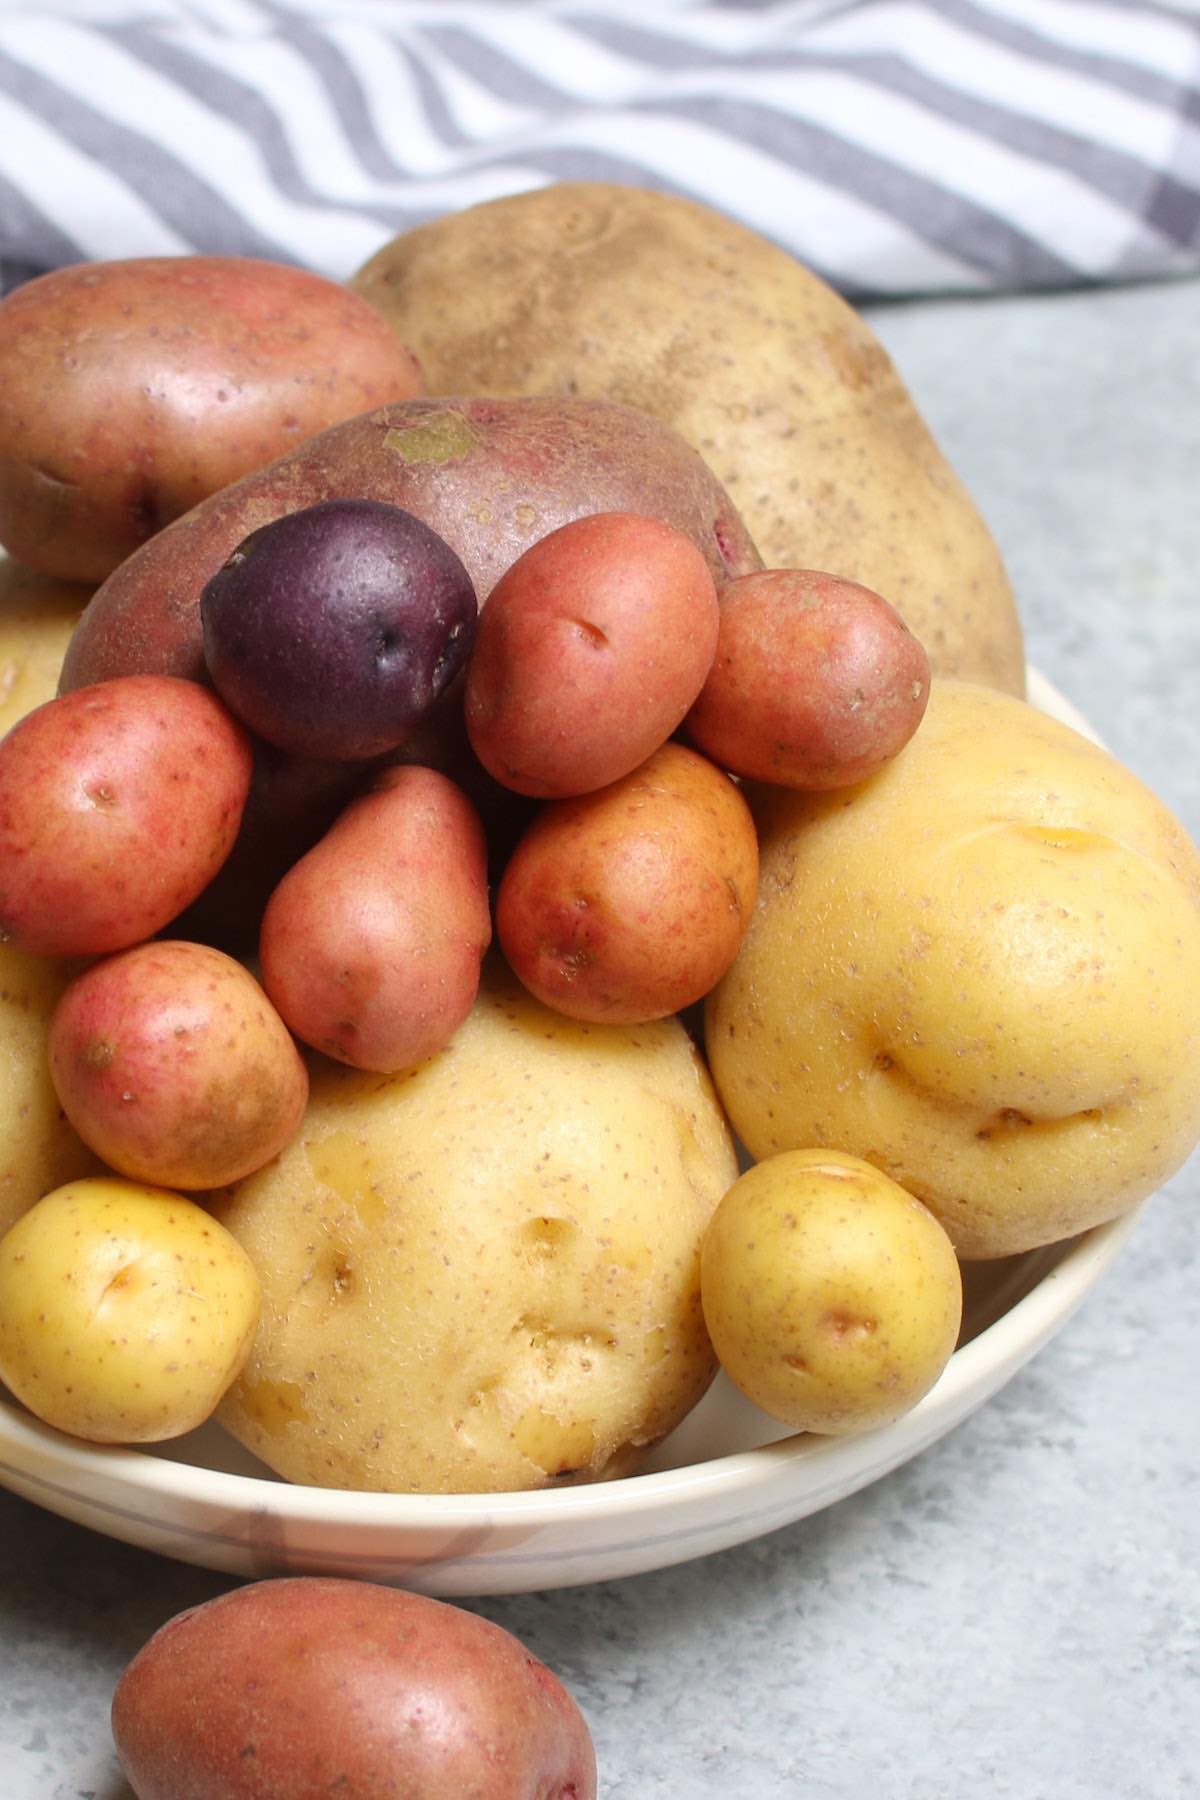 Various sizes and types of potatoes suitable for boiling: baby red potatoes, baby white potatoes, Yukon Gold potatoes, Round White potatoes, Round Red potatoes, baking potatoes